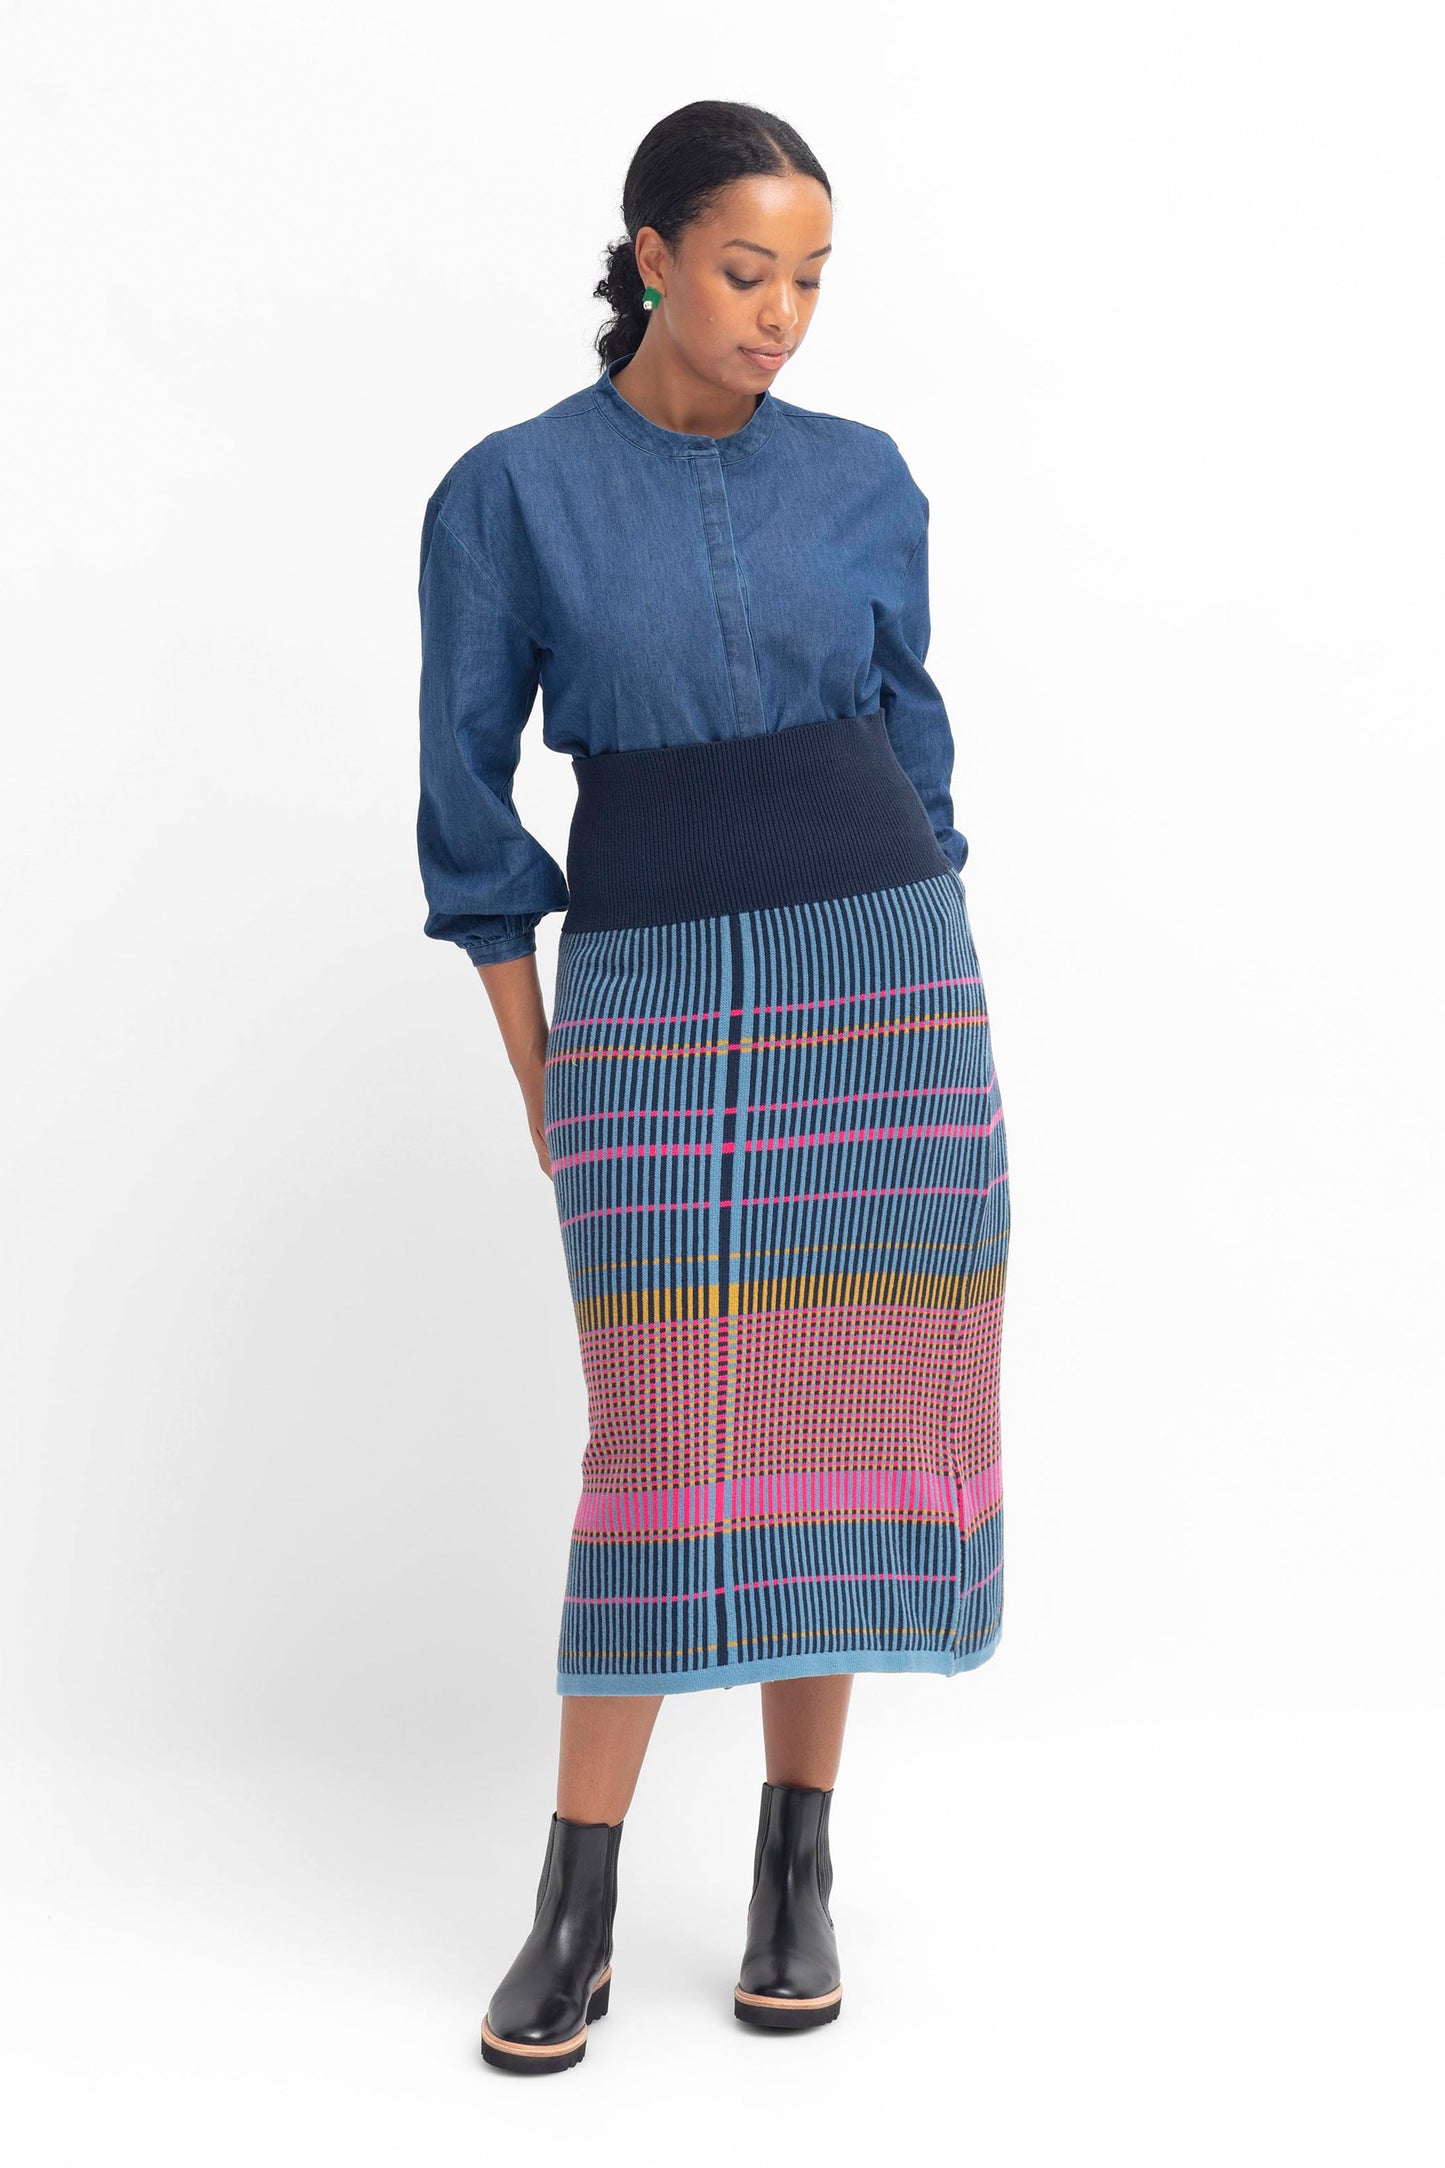 Cila Statement Multi Coloured Check Cotton Knit Midi Skirt Model Front Full Body with Jin Shirt | PINK MULTI